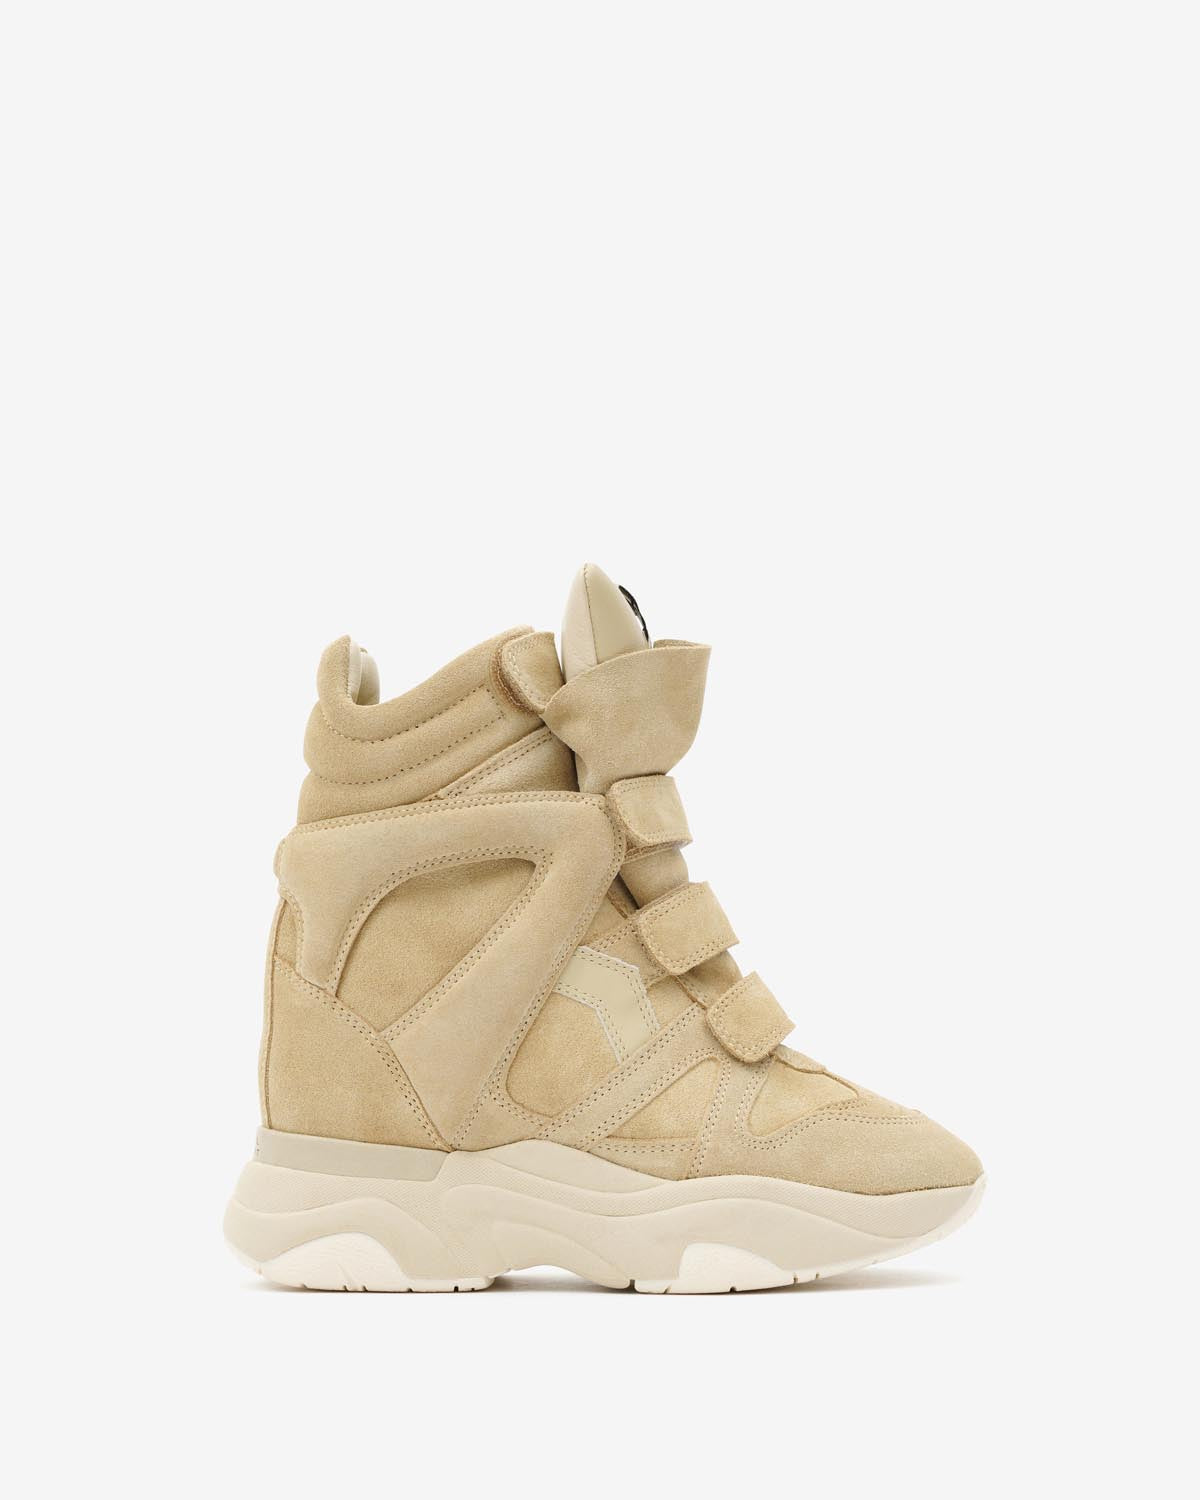 Isabel Marant Taupe Bilsy Sneakers